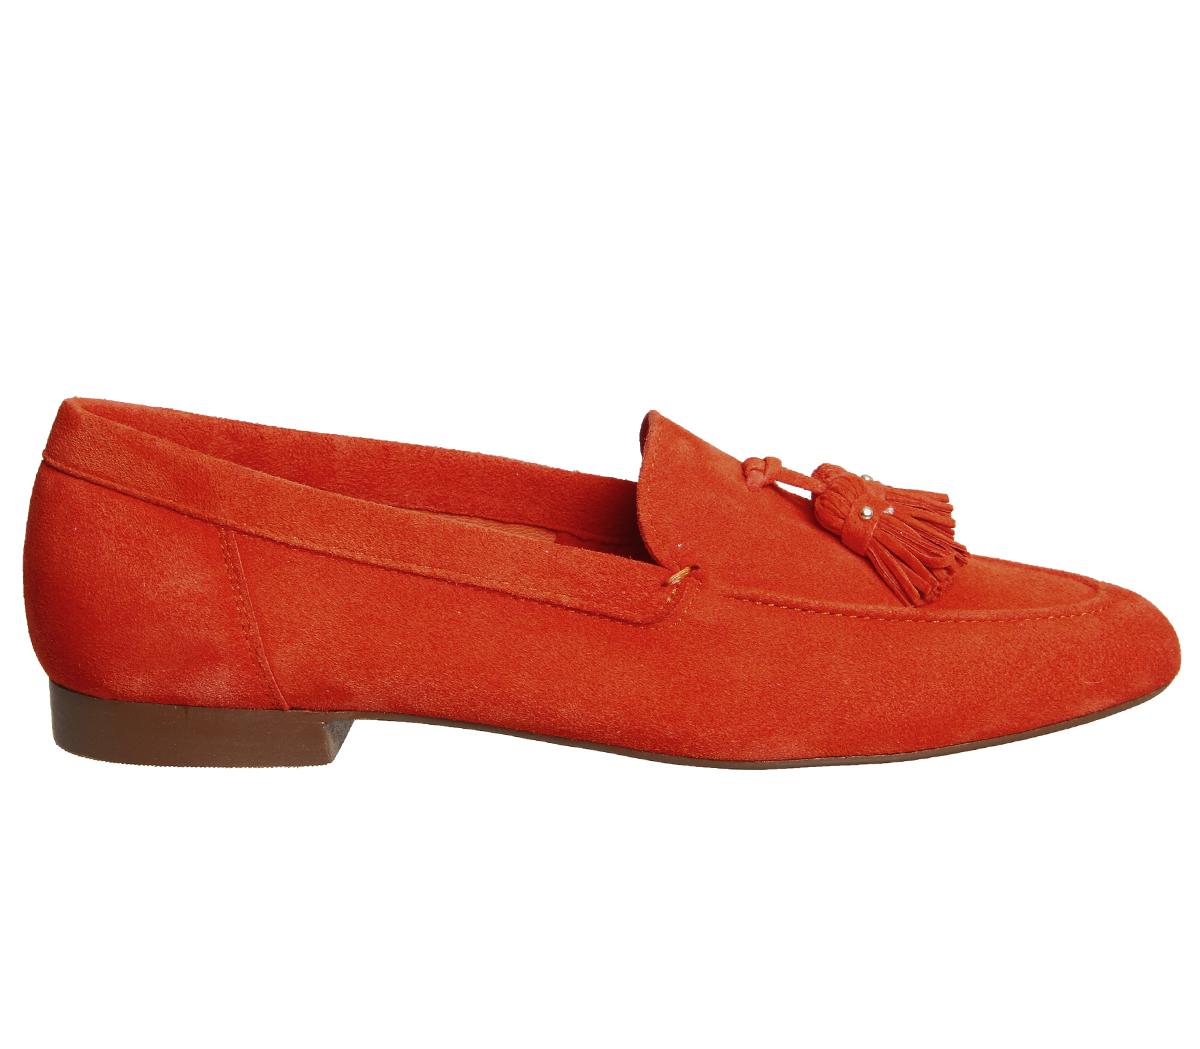 77 Limited Edition Dark red flat shoes for Trend in 2022